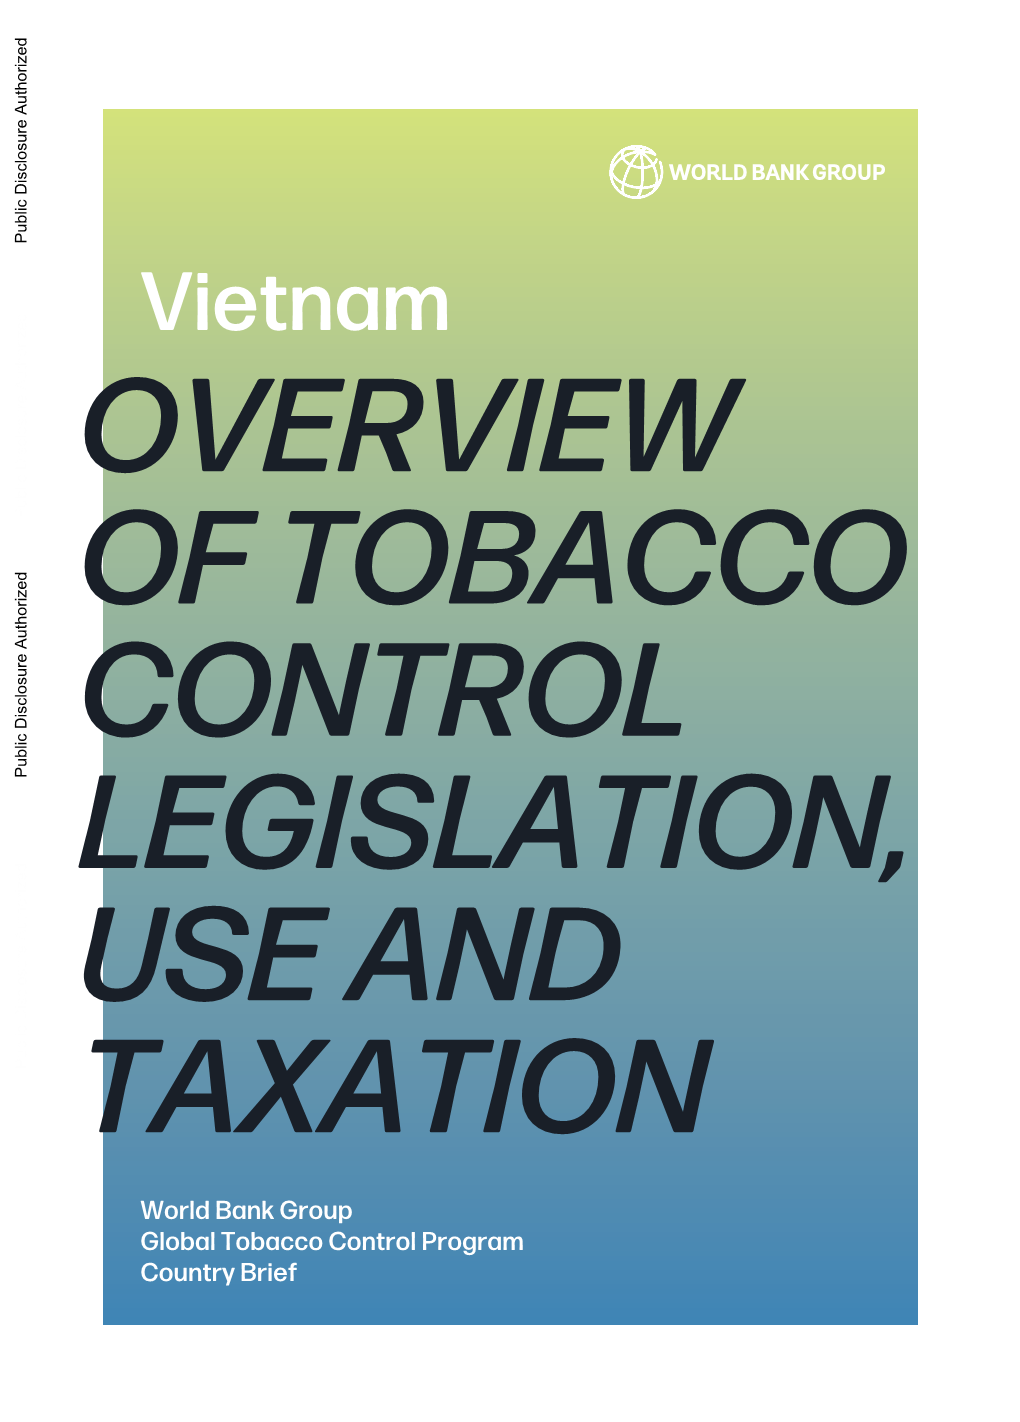 Overview of Tobacco Control Legislation, Use and Taxation